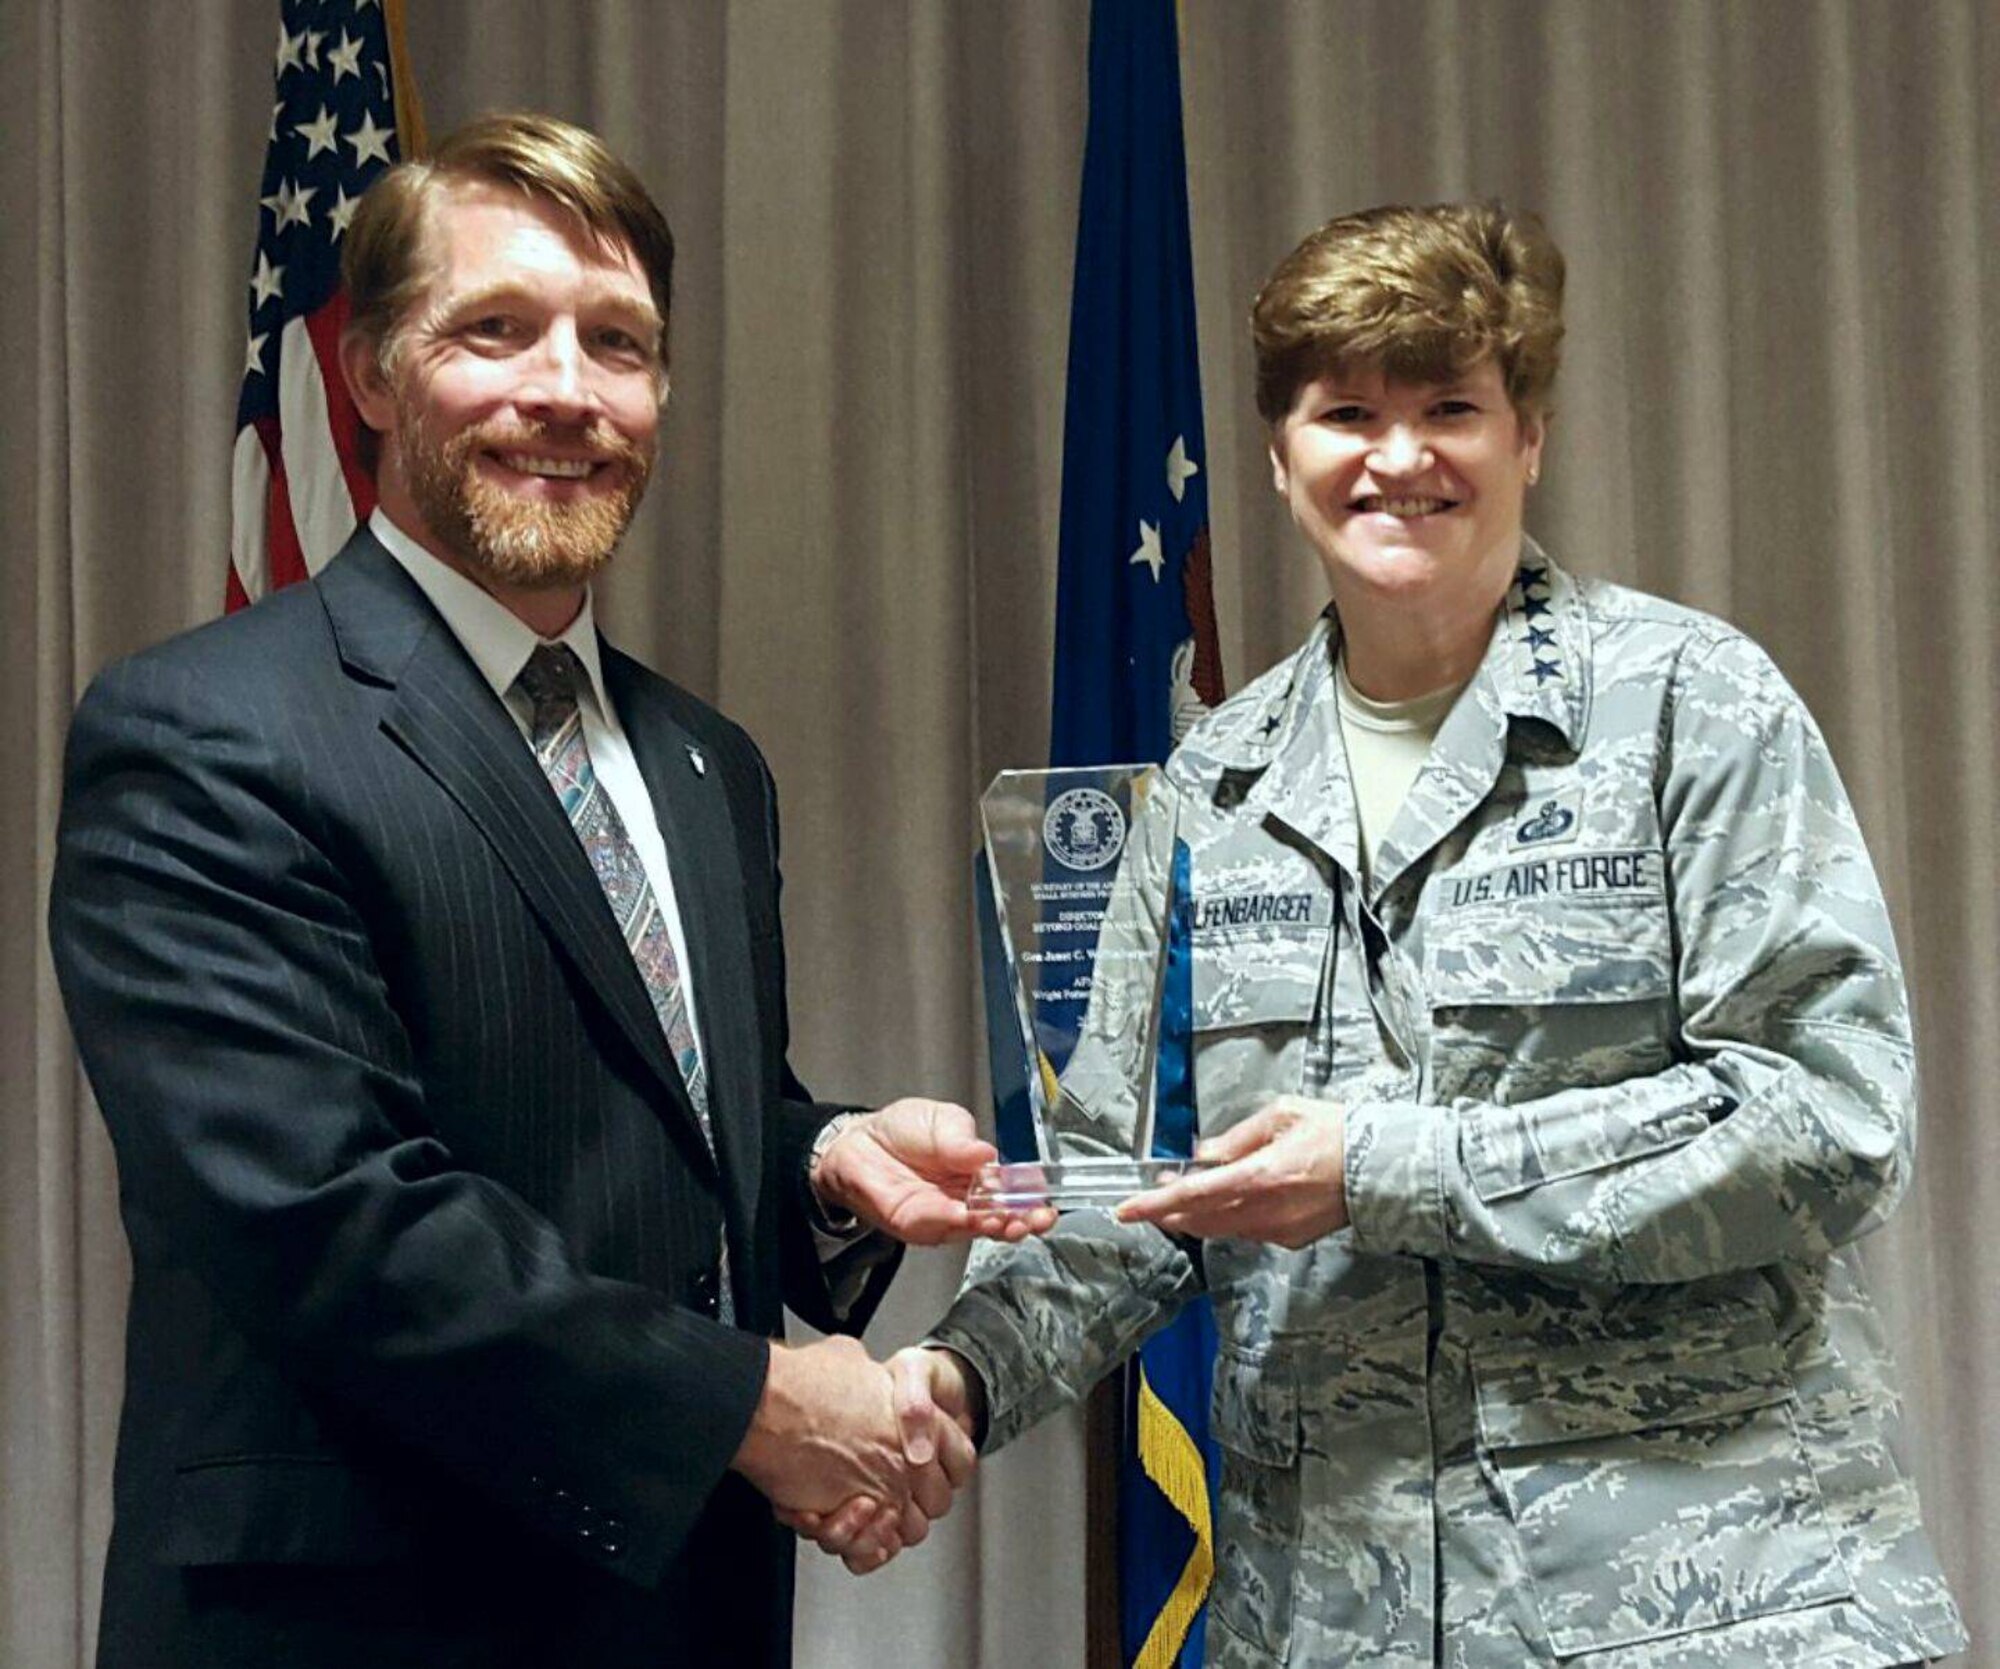 Mark Teskey, Air Force Director of Small Business Programs, presents Gen. Janet Wolfenbarger, Air Force Materiel Command commander, the 2014 Secretary of the Air Force Small Business Director’s Beyond Goals Award. (U.S. Air Force photo/Stacey Geiger)